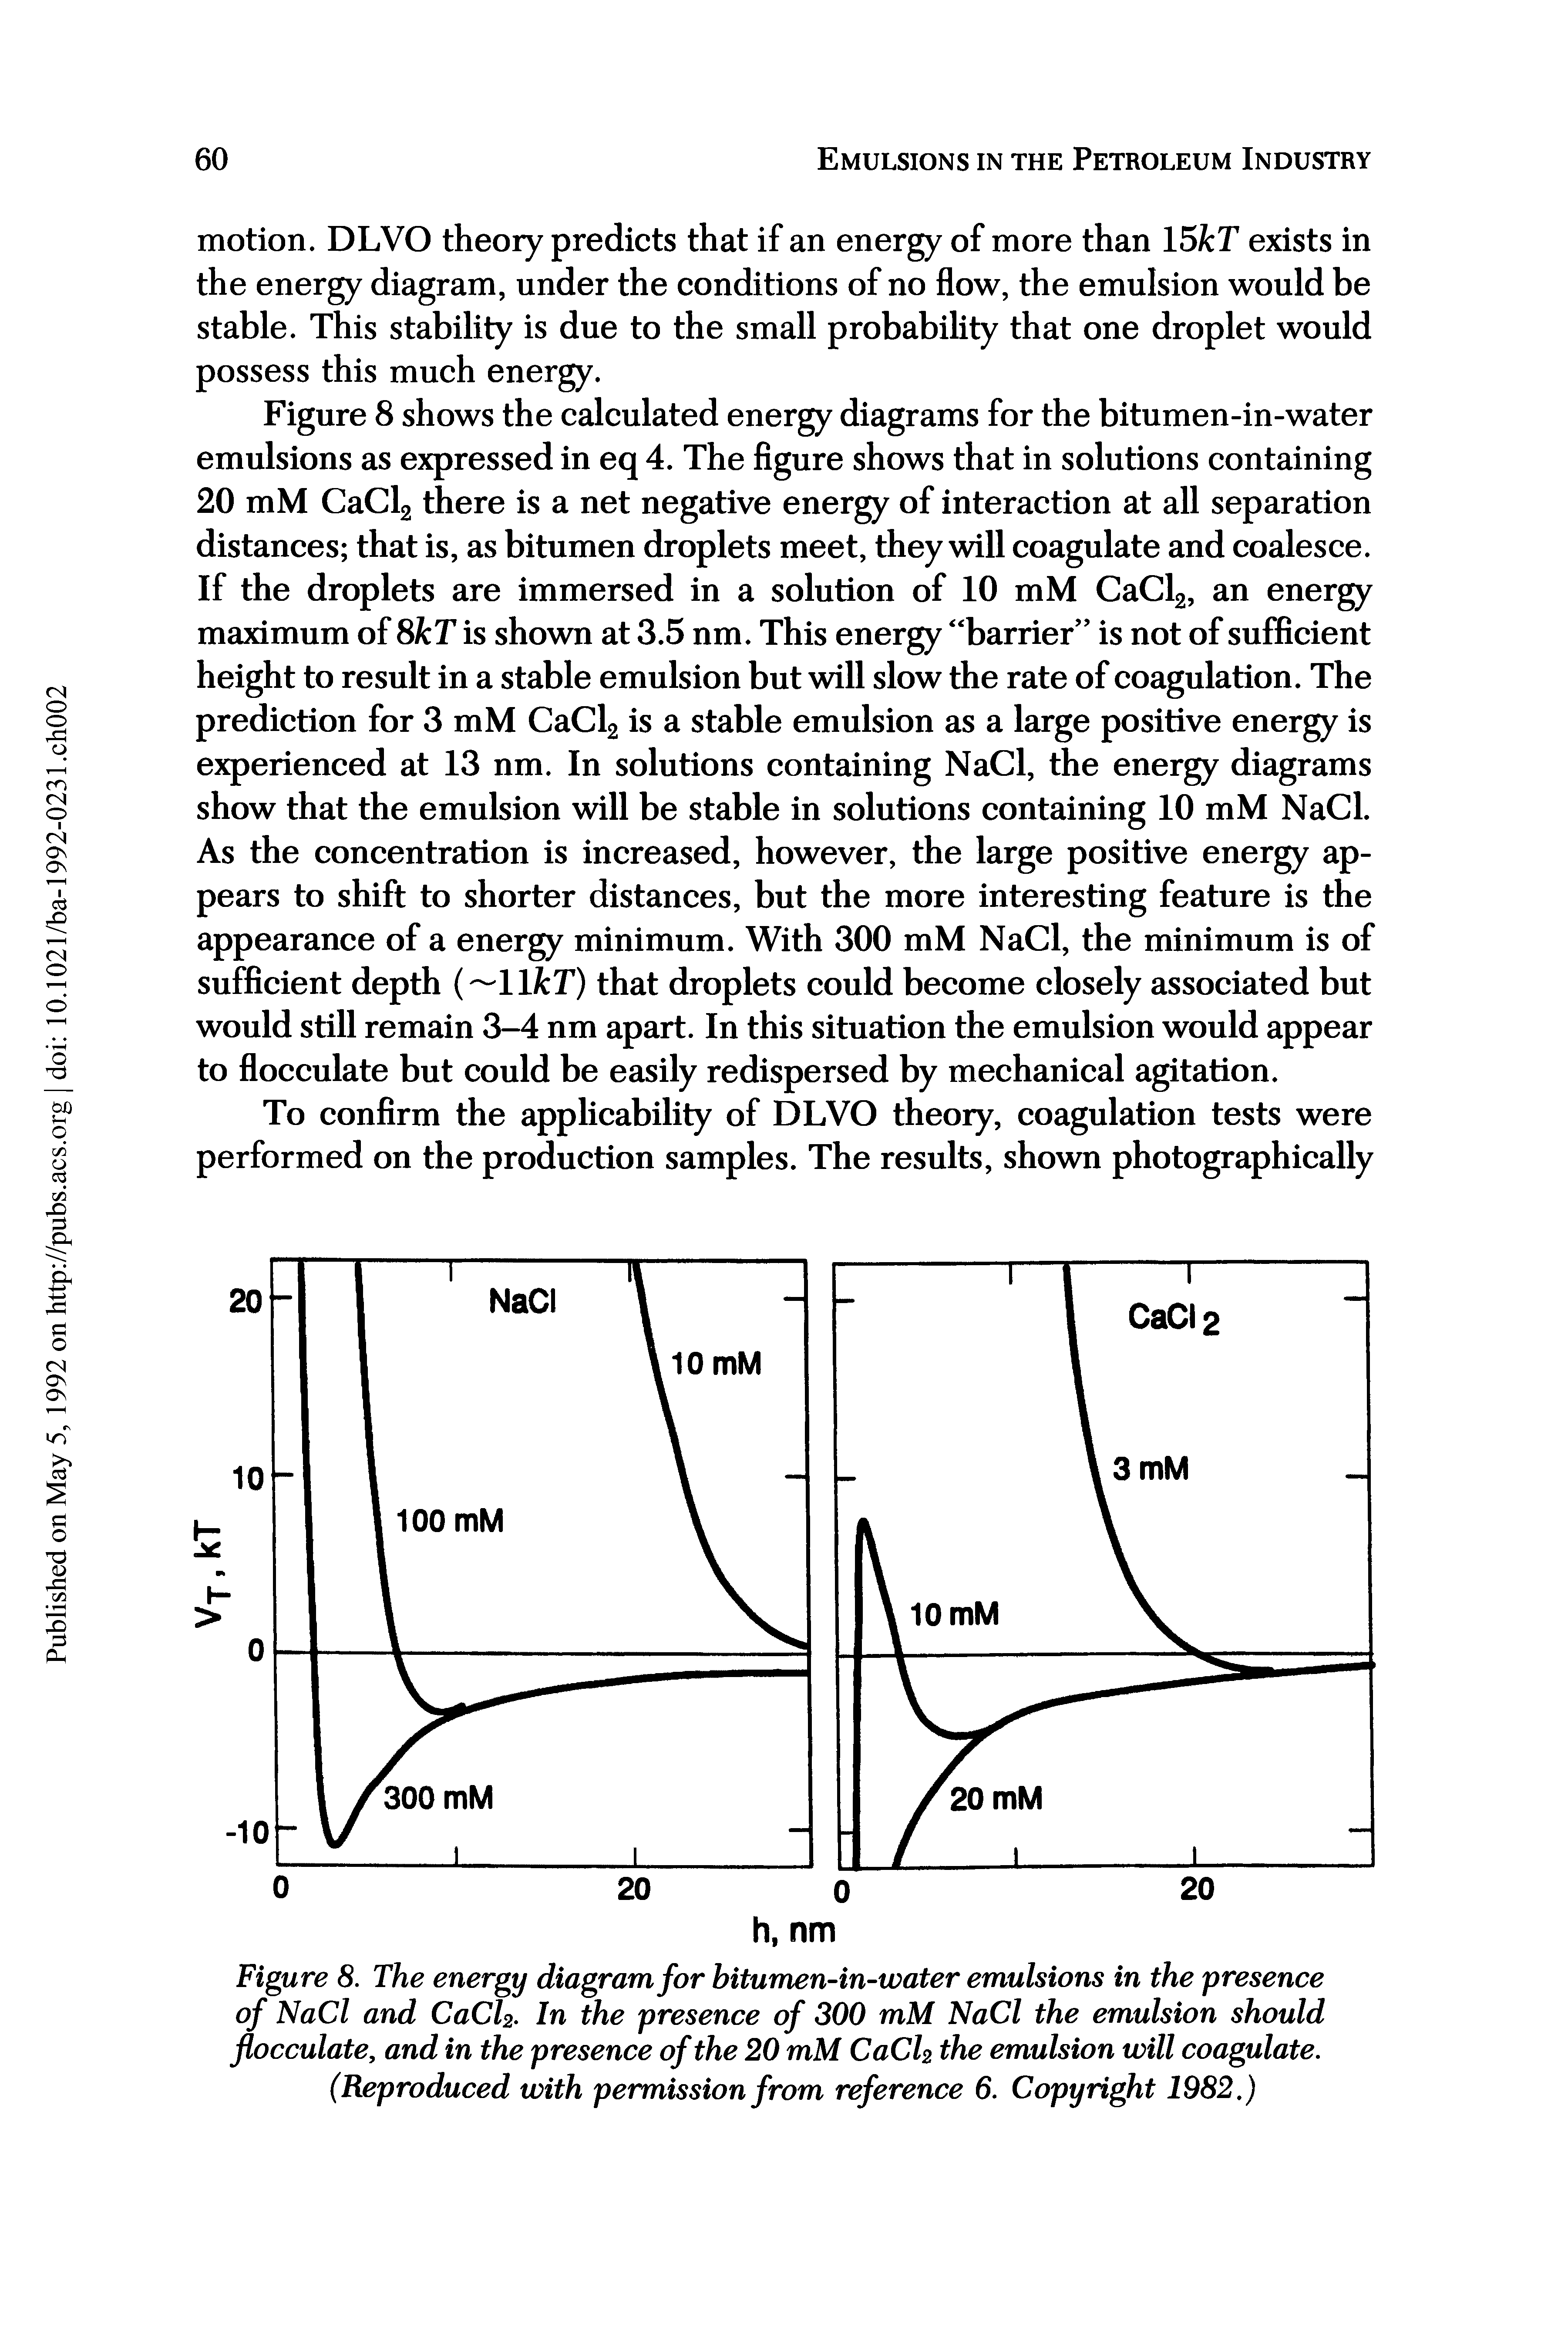 Figure 8. The energy diagram for bitumen-in-water emulsions in the presence of NaCl and CaCh. In the presence of 300 mM NaCl the emulsion should flocculate, and in the presence of the 20 mM CaCh the emulsion will coagulate. (Reproduced with permission from reference 6. Copyright 1982.)...